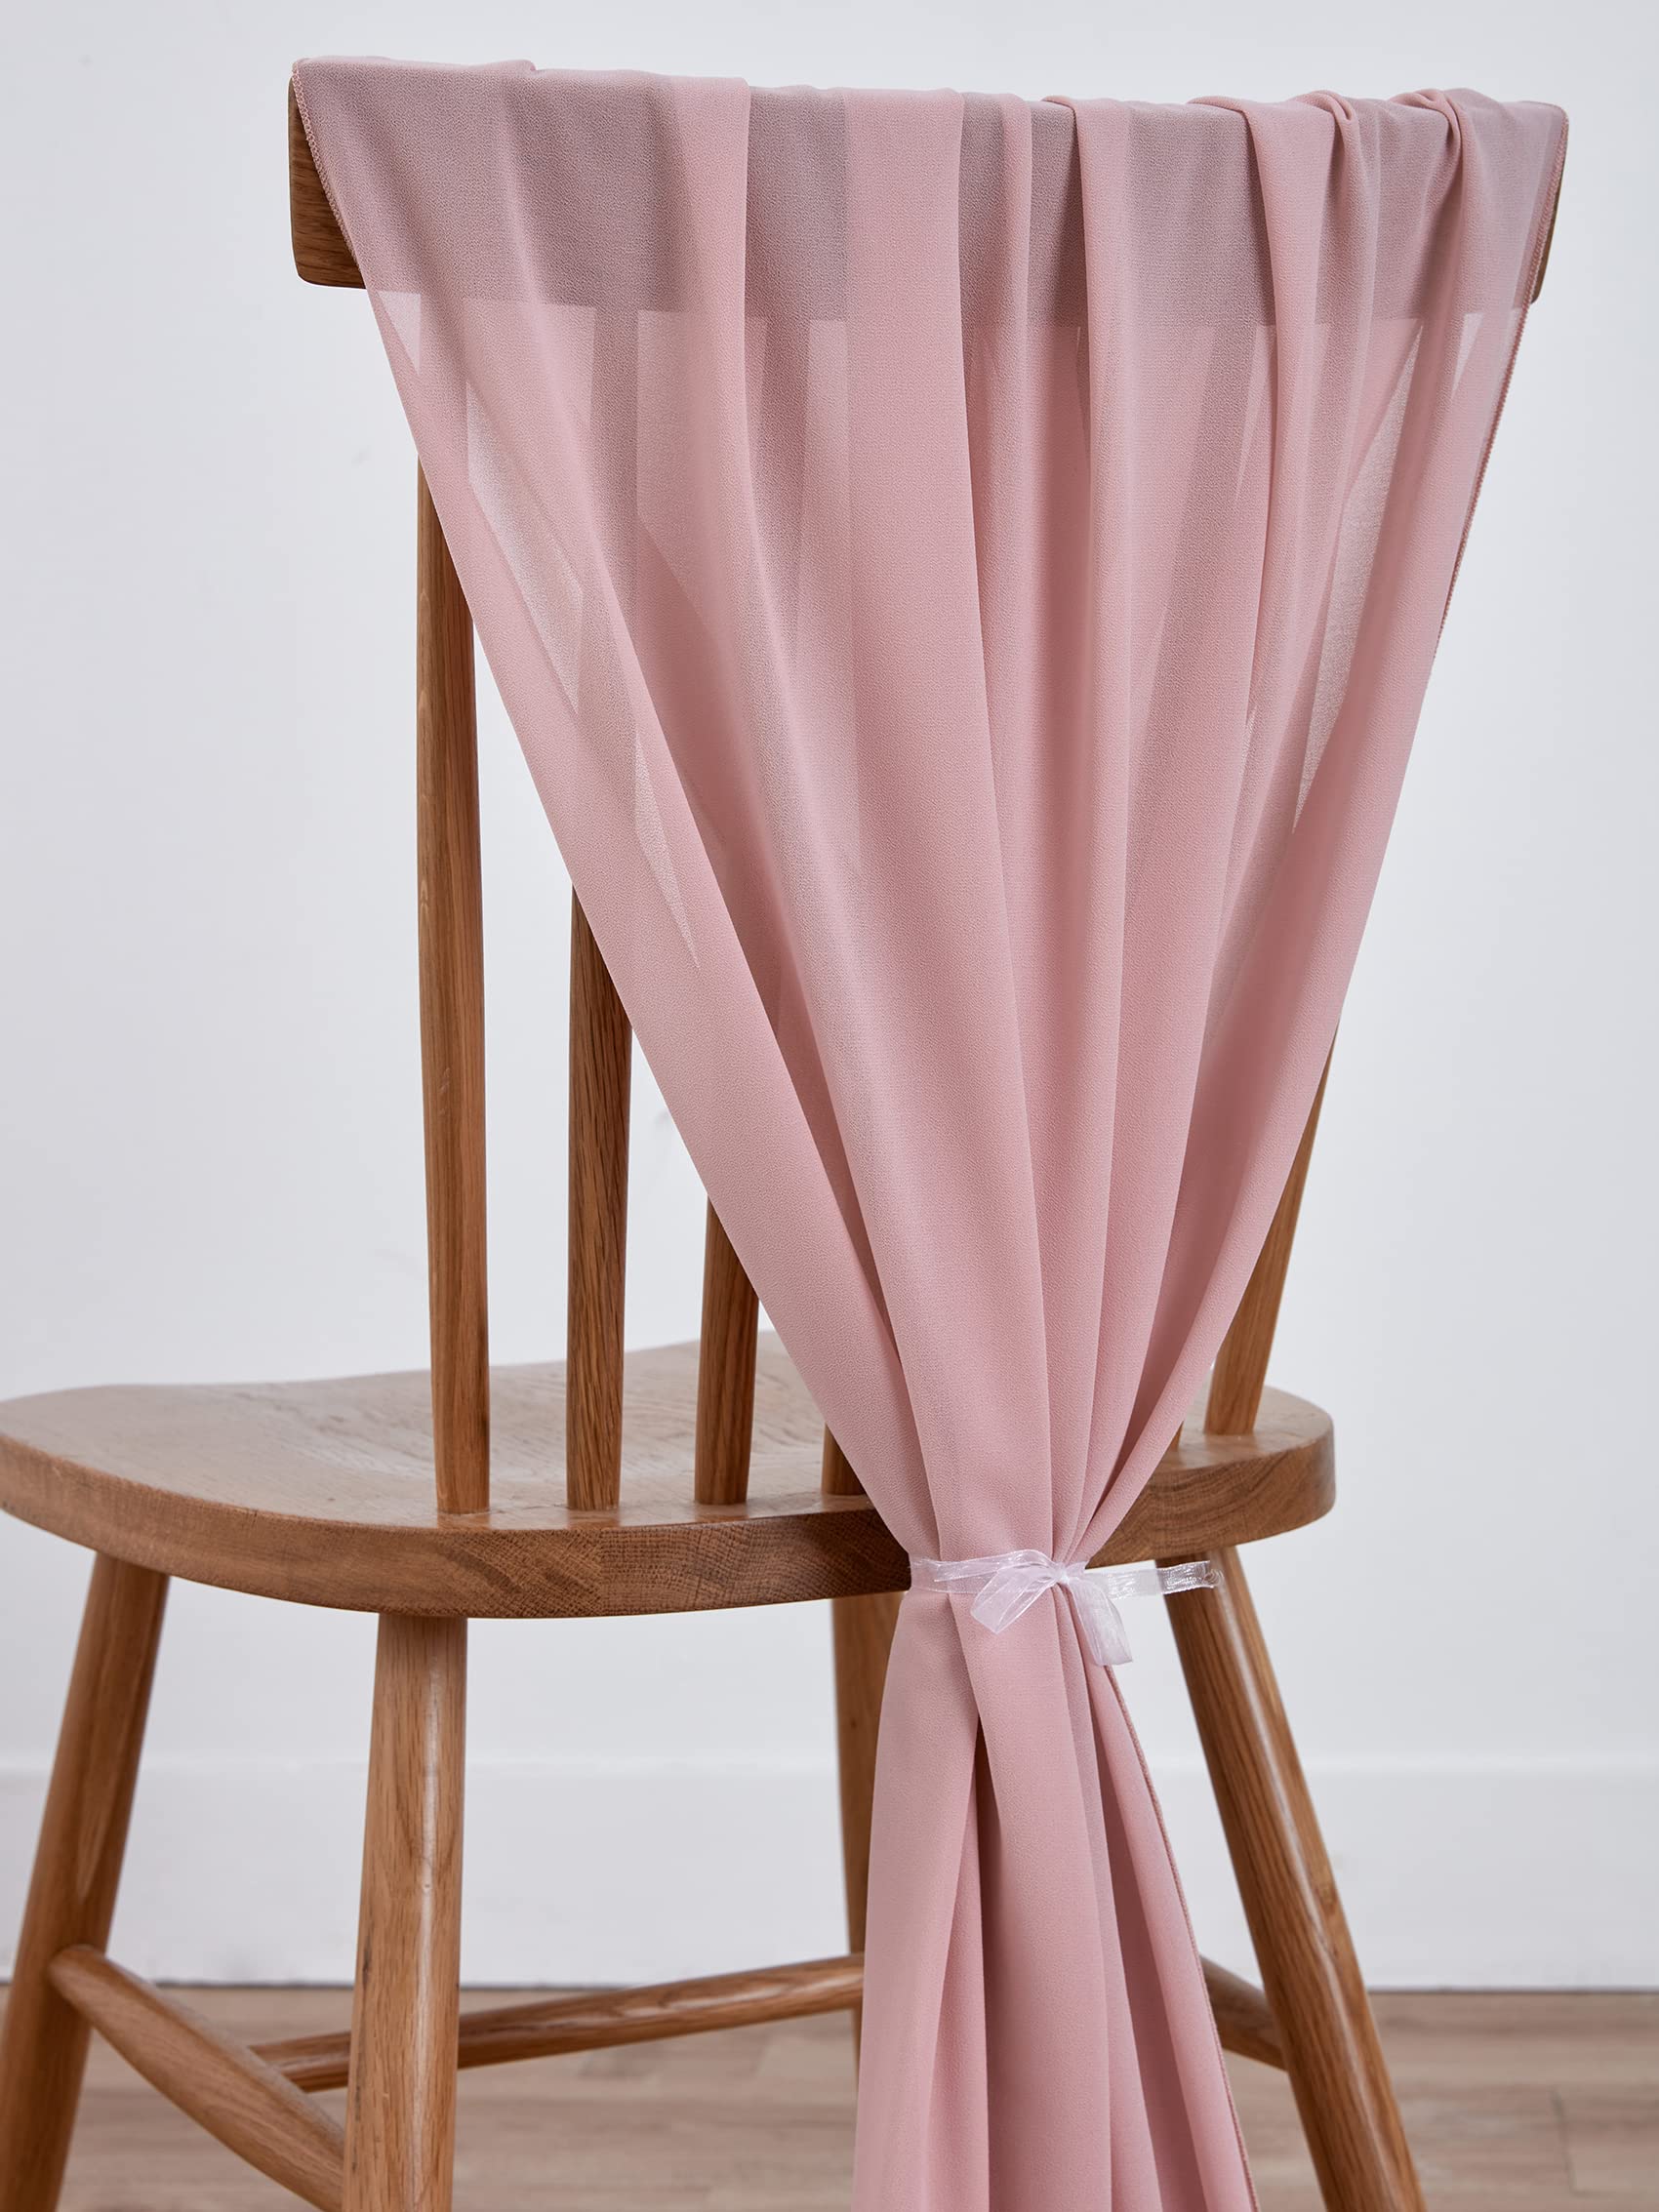 BEDDEB 10 Pack Dusty Rose Chiffon Table Runner 10Ft Sheer Wedding Table Runner 29x120 Inches Romantic Tulle Table Runner for Rustic Wedding Decor Birthday Party Bridal Baby Shower Table Decoration